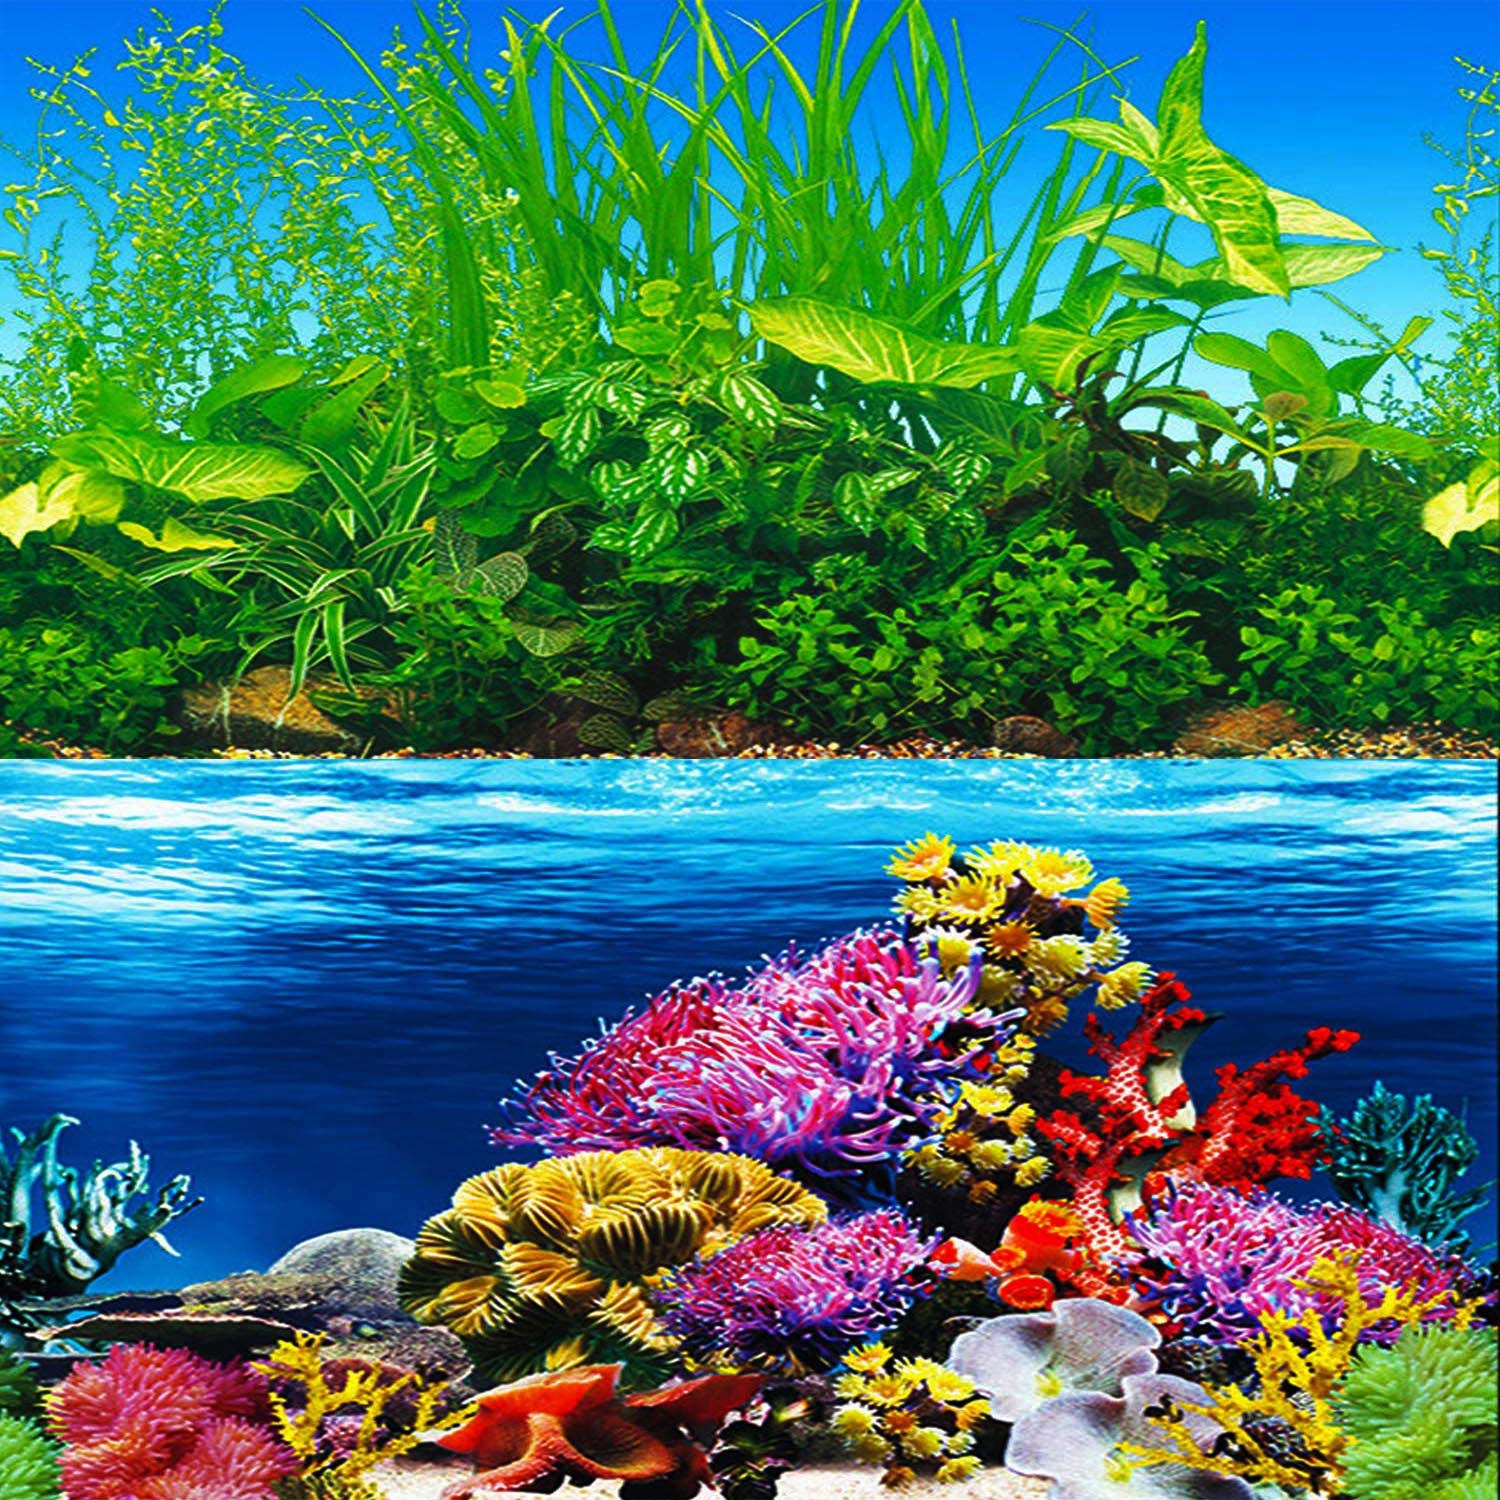 Elebox New 20 X 48 Fish Tank Background Paper Wallpaper 2 Sided Colorful Seaweed Water Plants Aquarium Background Picture